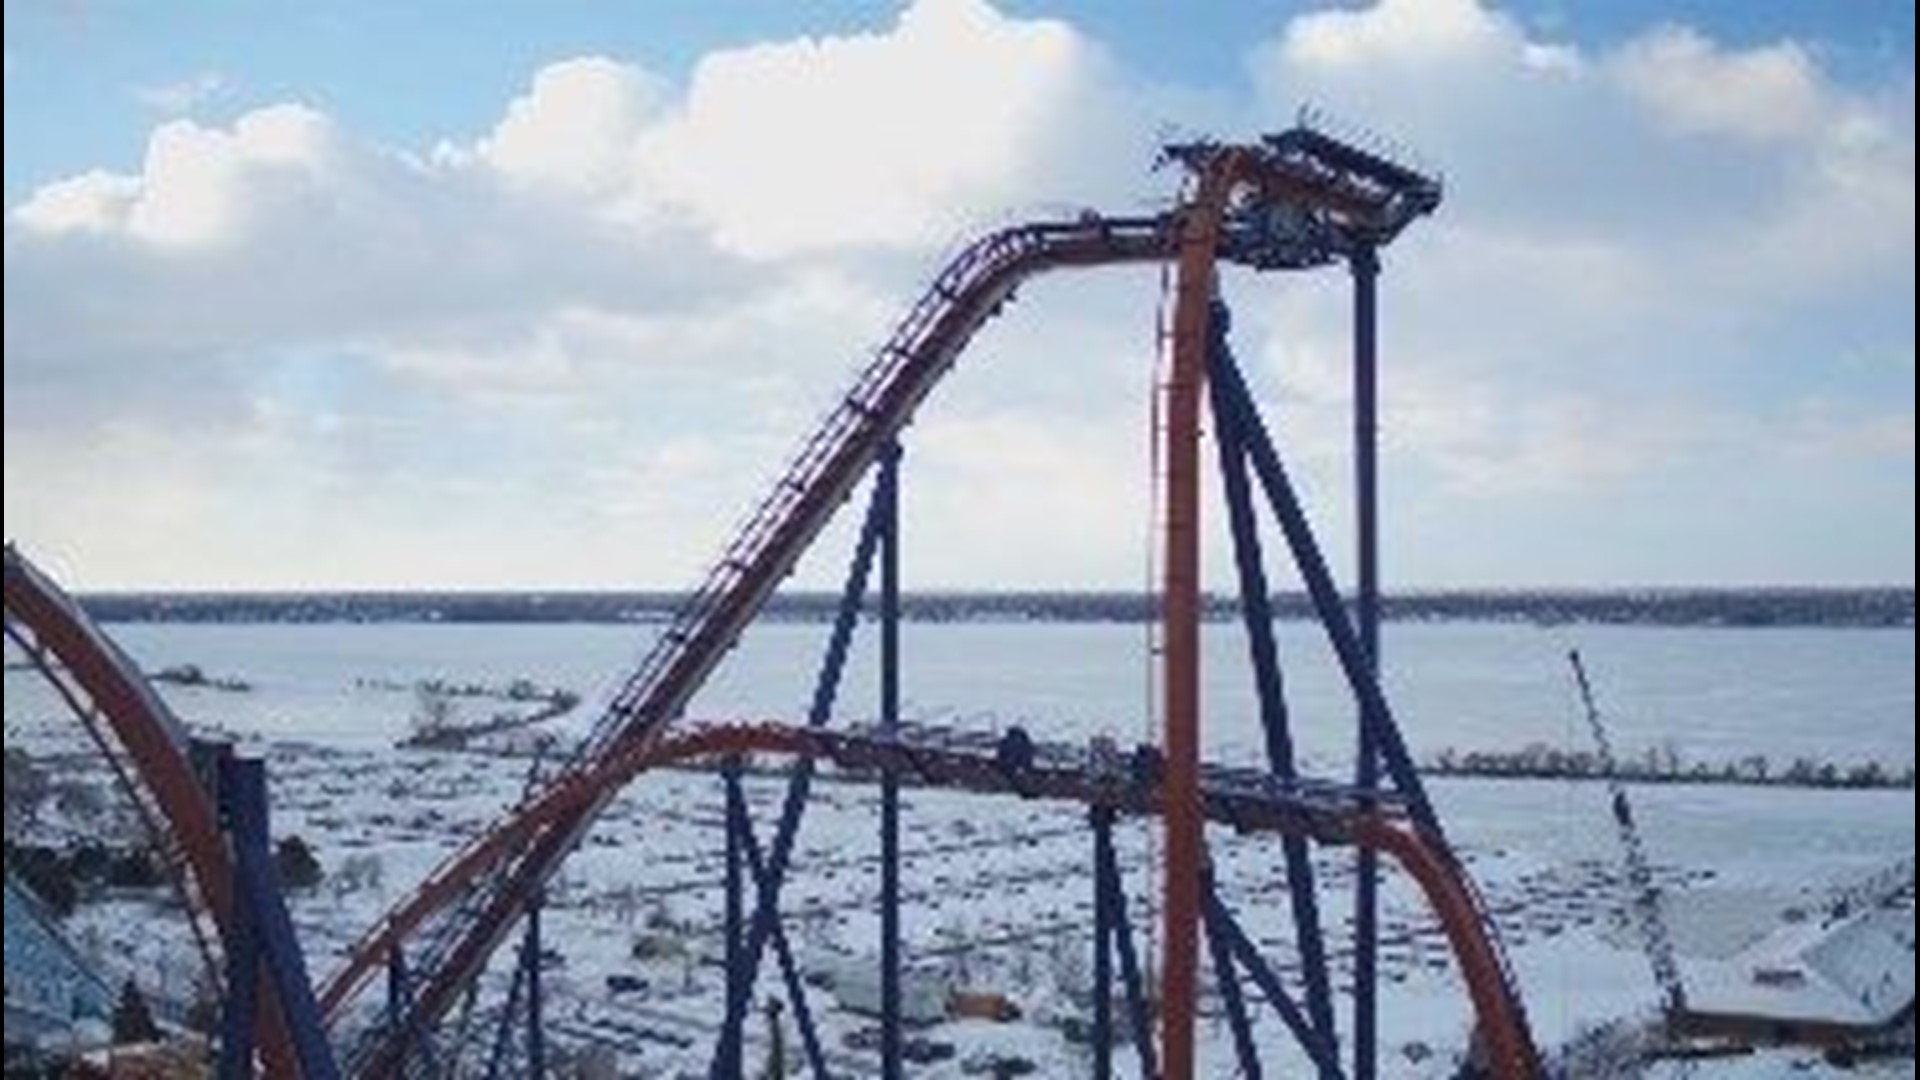 RAW: Aerial view of Cedar Point's new Valravn